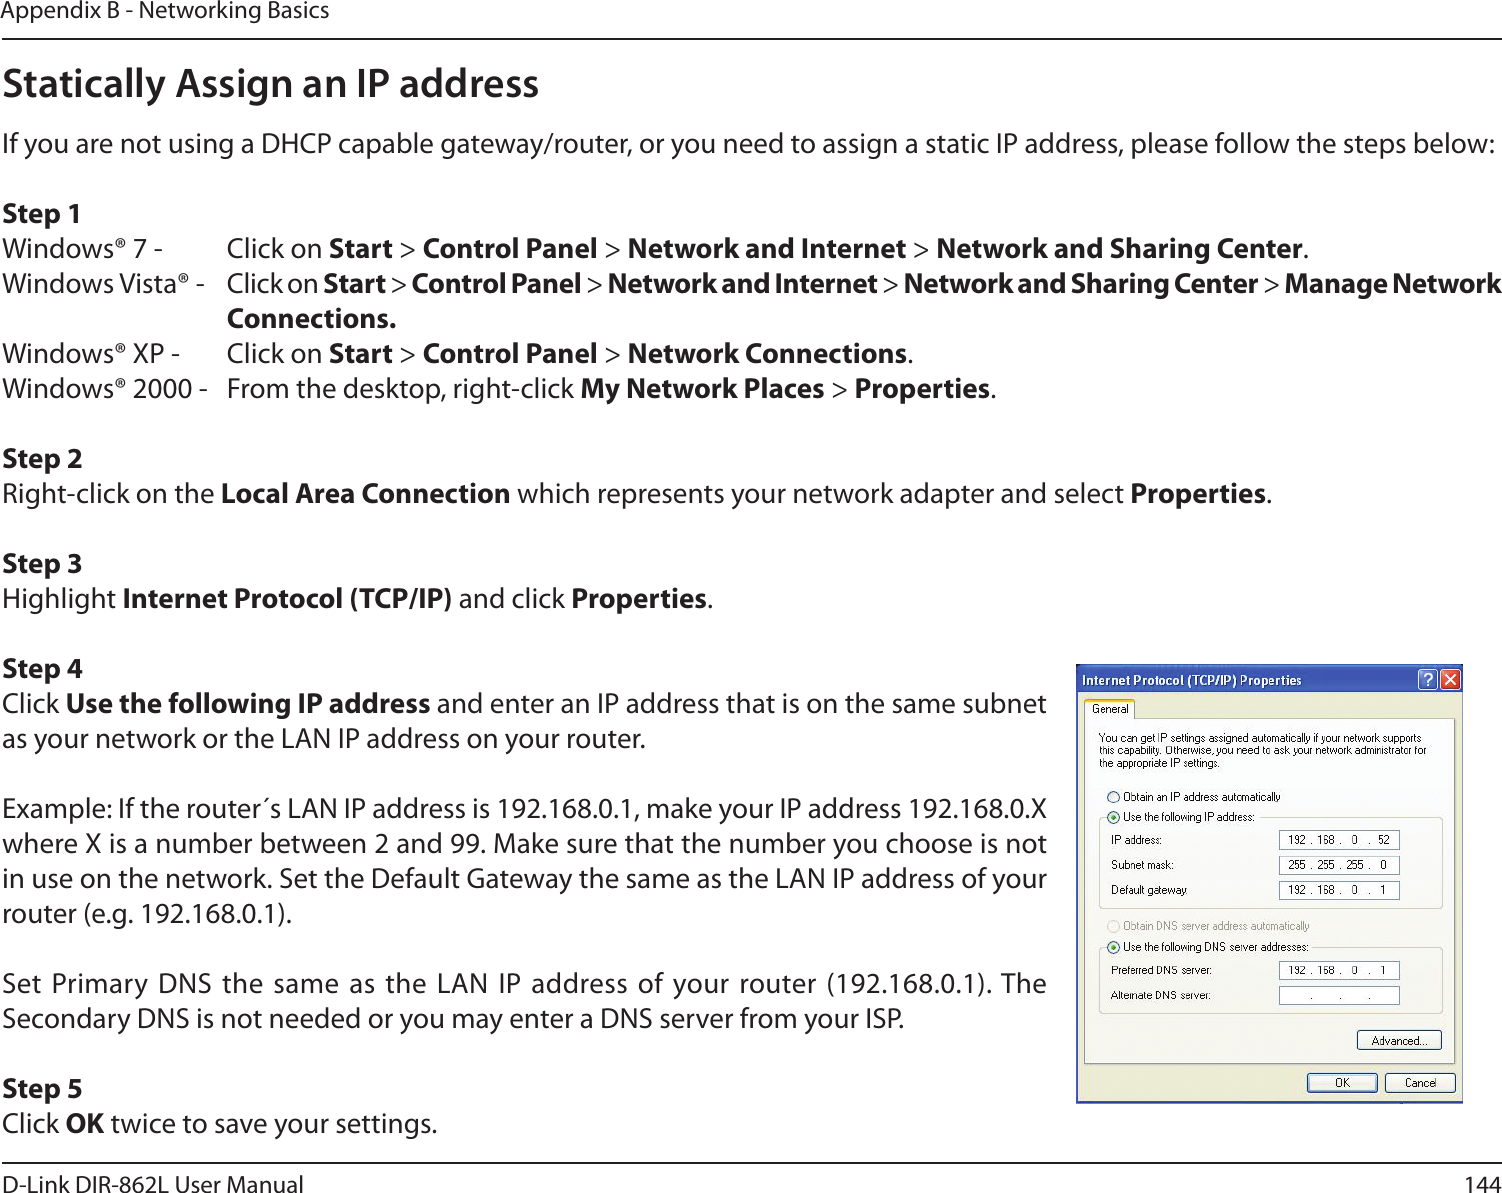 144D-Link DIR-862L User ManualAppendix B - Networking BasicsStatically Assign an IP addressIf you are not using a DHCP capable gateway/router, or you need to assign a static IP address, please follow the steps below:Step 1Windows® 7 -  Click on Start &gt; Control Panel &gt; Network and Internet &gt; Network and Sharing Center.Windows Vista® -  Click on Start &gt; Control Panel &gt; Network and Internet &gt; Network and Sharing Center &gt; Manage Network    Connections.Windows® XP -  Click on Start &gt; Control Panel &gt; Network Connections.Windows® 2000 -  From the desktop, right-click My Network Places &gt; Properties.Step 2Right-click on the Local Area Connection which represents your network adapter and select Properties.Step 3Highlight Internet Protocol (TCP/IP) and click Properties.Step 4Click Use the following IP address and enter an IP address that is on the same subnet as your network or the LAN IP address on your router. Example: If the router´s LAN IP address is 192.168.0.1, make your IP address 192.168.0.X where X is a number between 2 and 99. Make sure that the number you choose is not in use on the network. Set the Default Gateway the same as the LAN IP address of your router (e.g. 192.168.0.1). Set Primary DNS the same as the LAN IP address of your router (192.168.0.1). The Secondary DNS is not needed or you may enter a DNS server from your ISP.Step 5Click OK twice to save your settings.